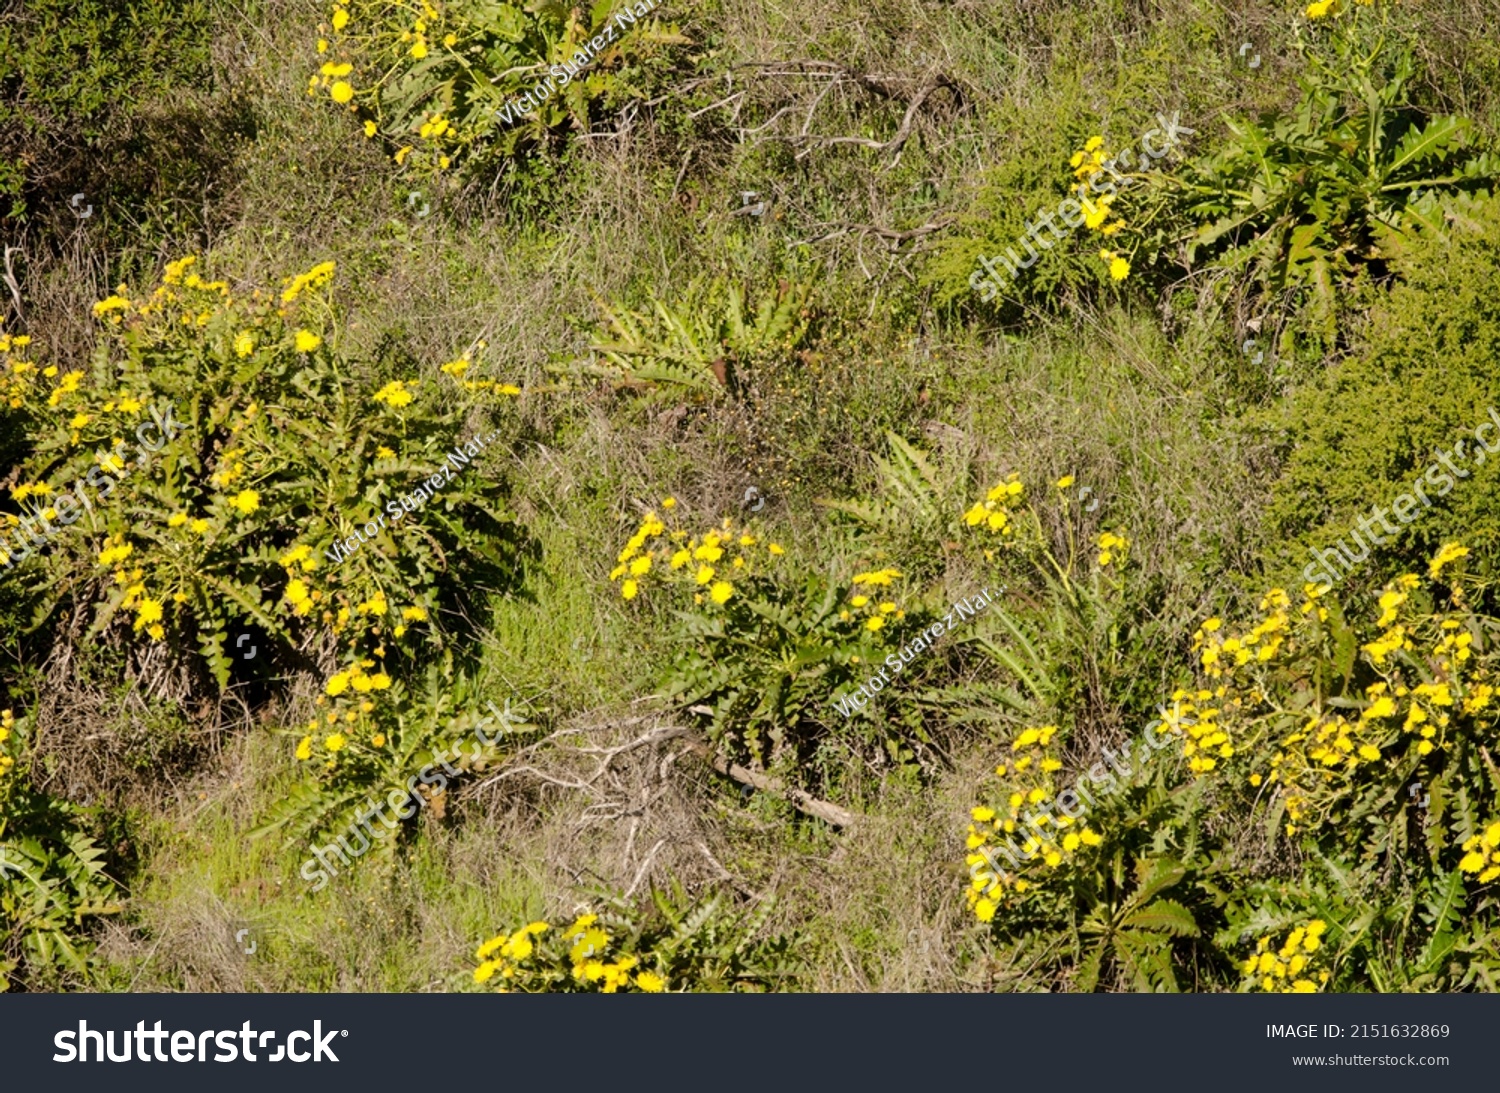 Sow thistles Sonchus hierrensis in bloom. Orone Protected Landscape. La Gomera. Canary Islands. Spain. #2151632869